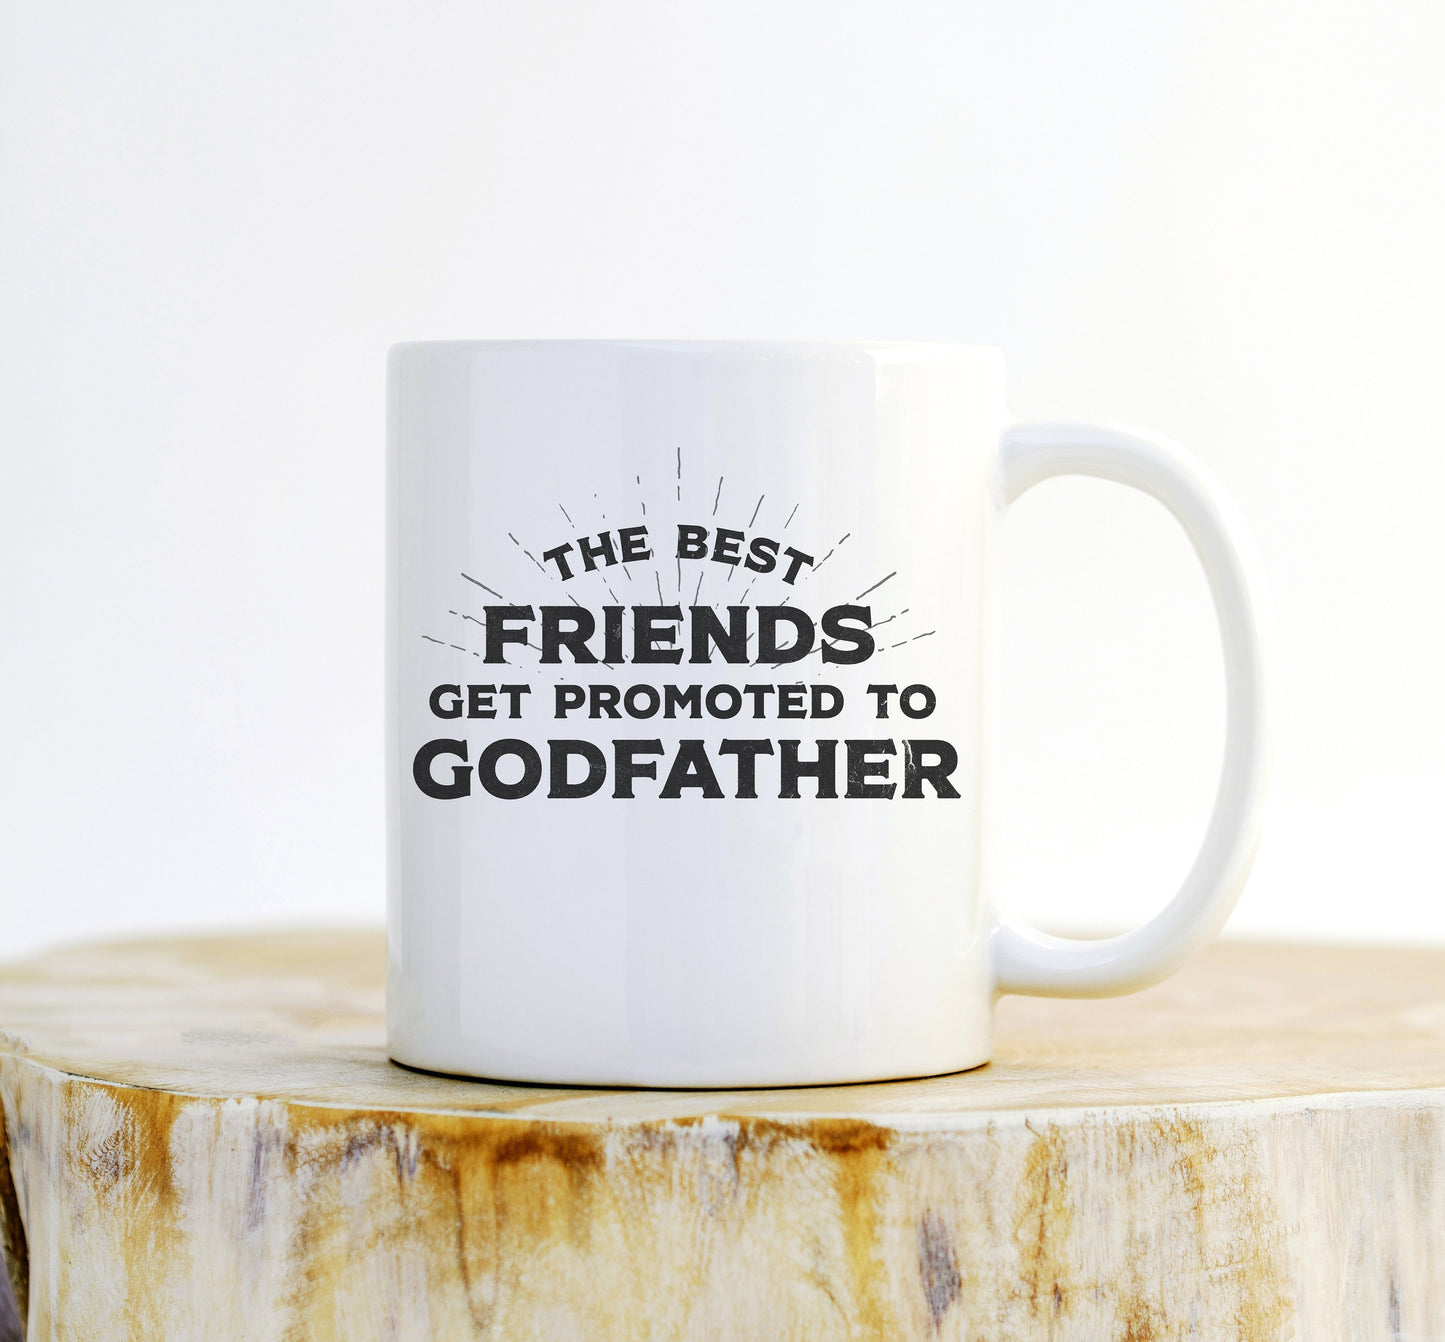 The Best Friends Get Promoted to Godfather Mug